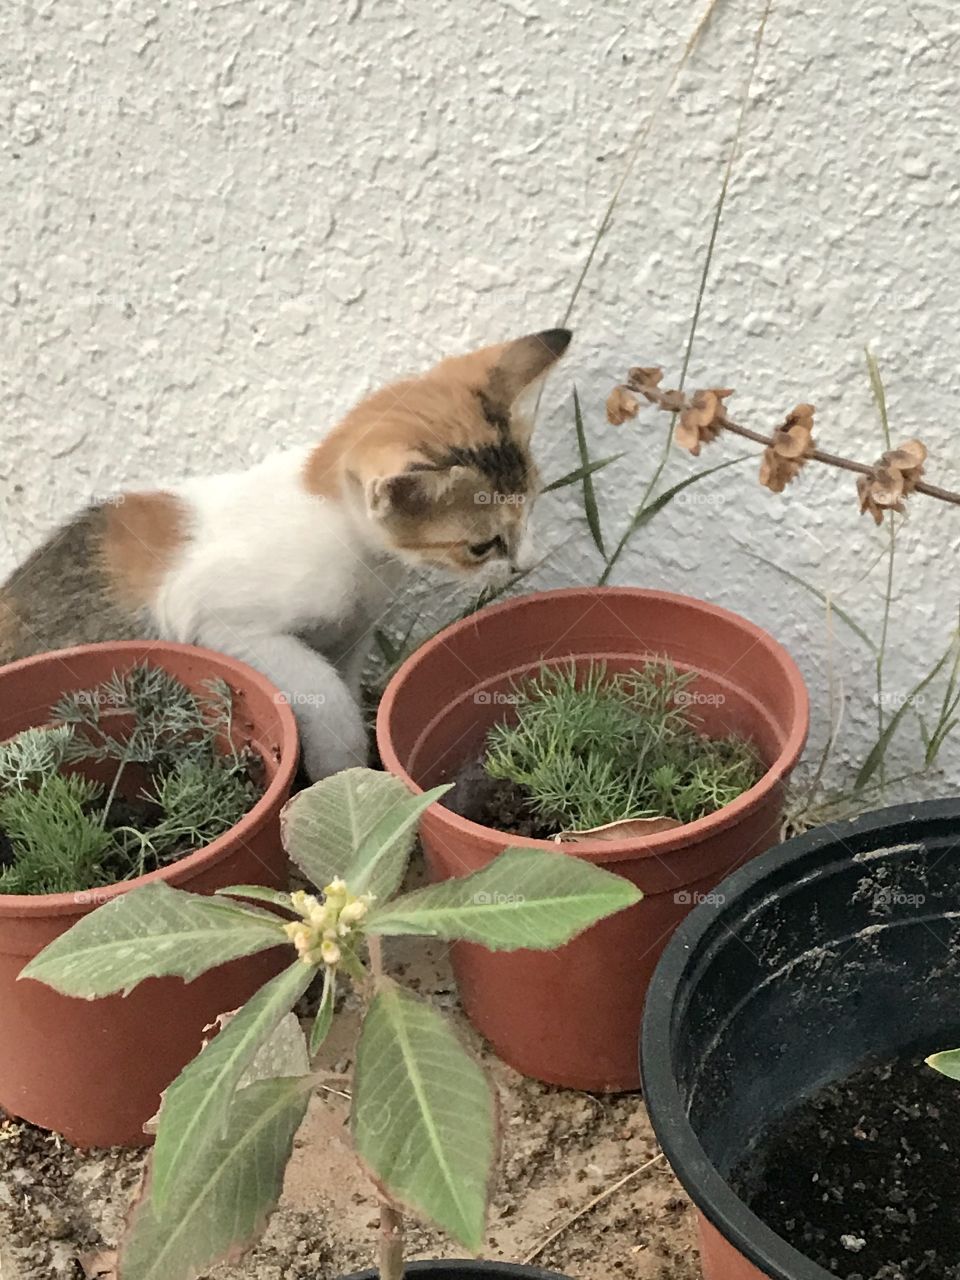 Cat playing in the garden with brown plant pots